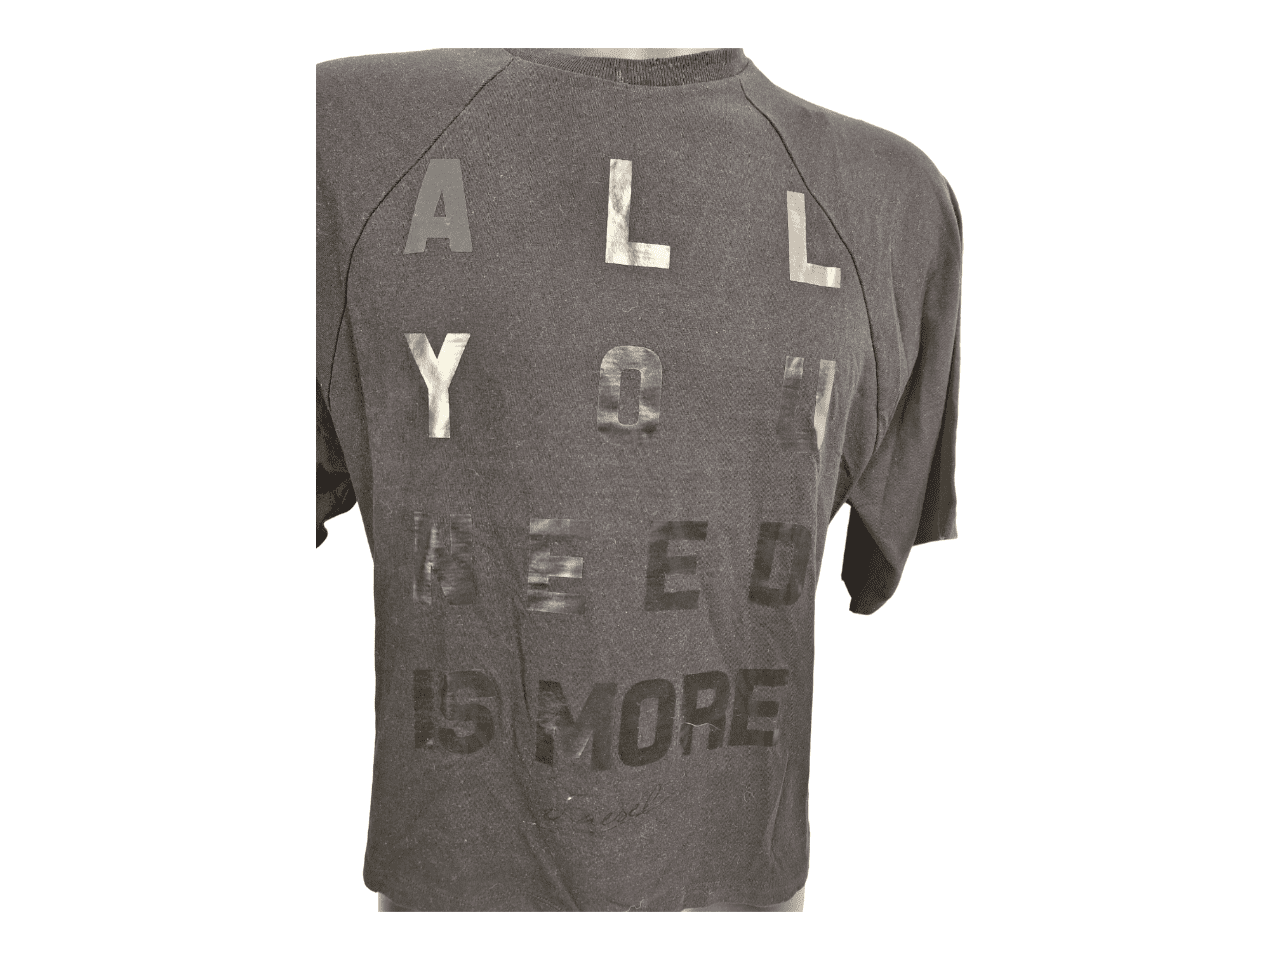 T-Shirt manche mi longues noir DIESEL "ALL YOU NEED IS MORE" Oversize